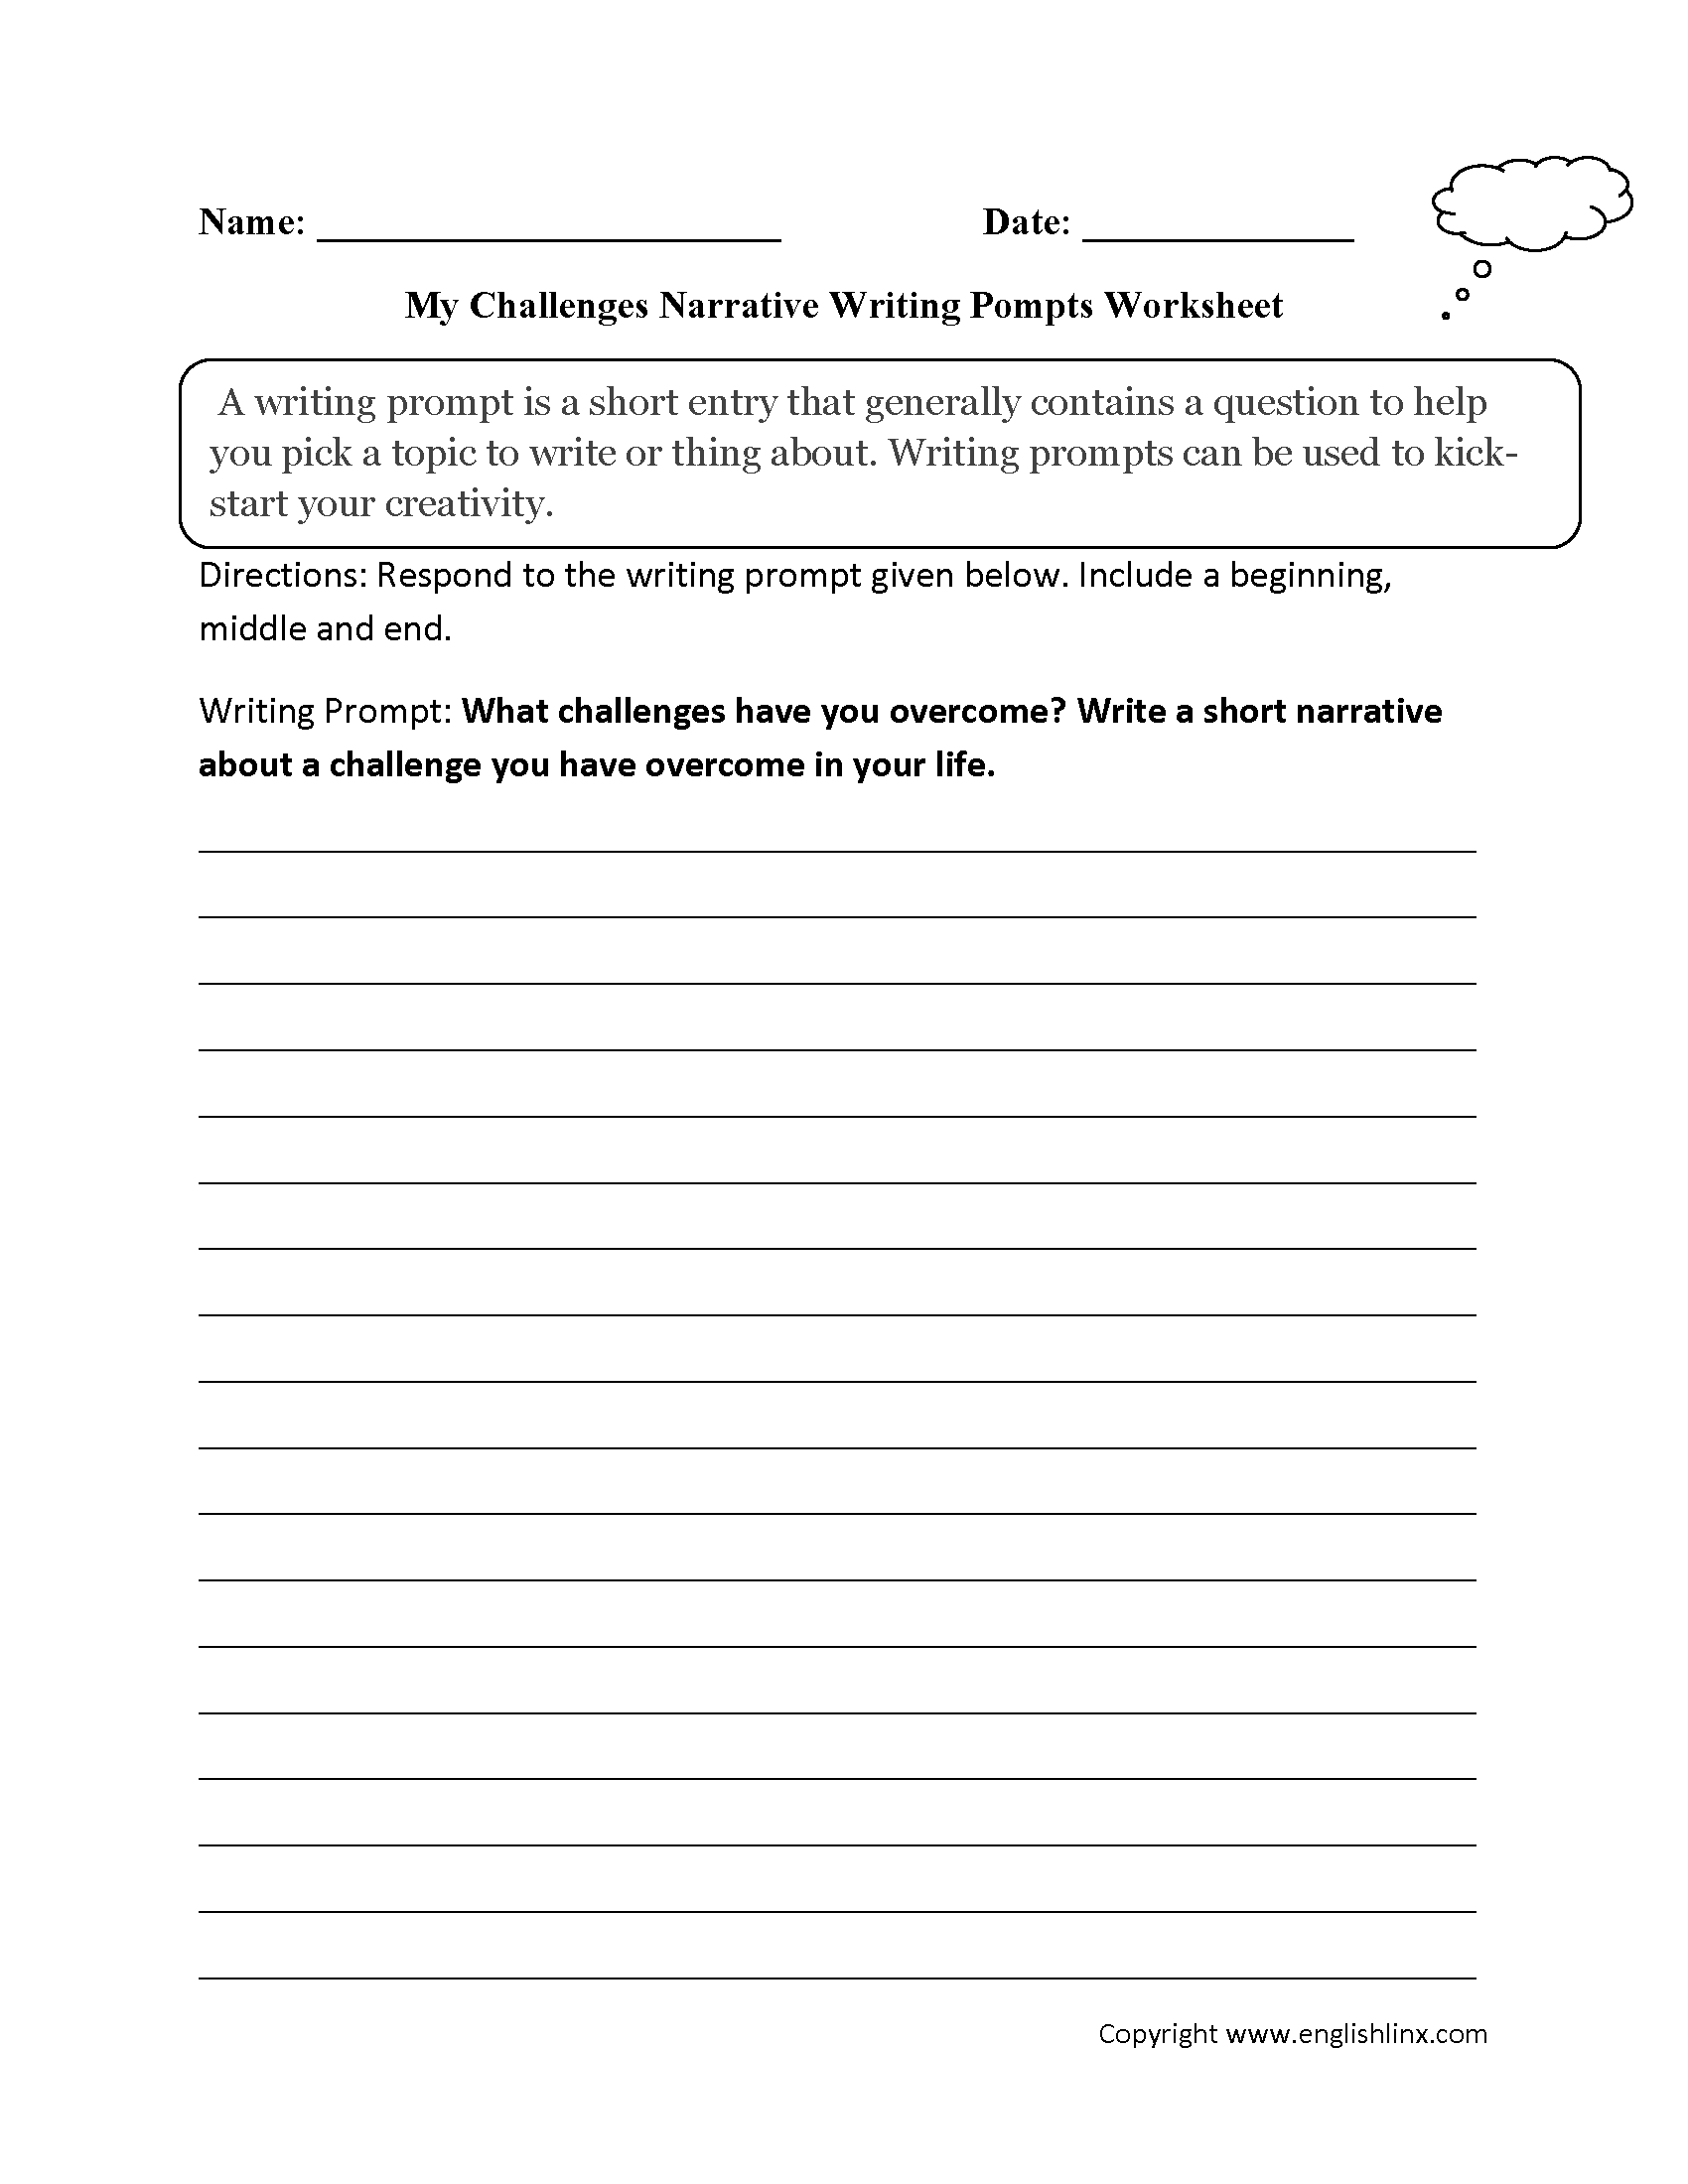 writing-prompts-worksheets-narrative-writing-prompt-worksheets